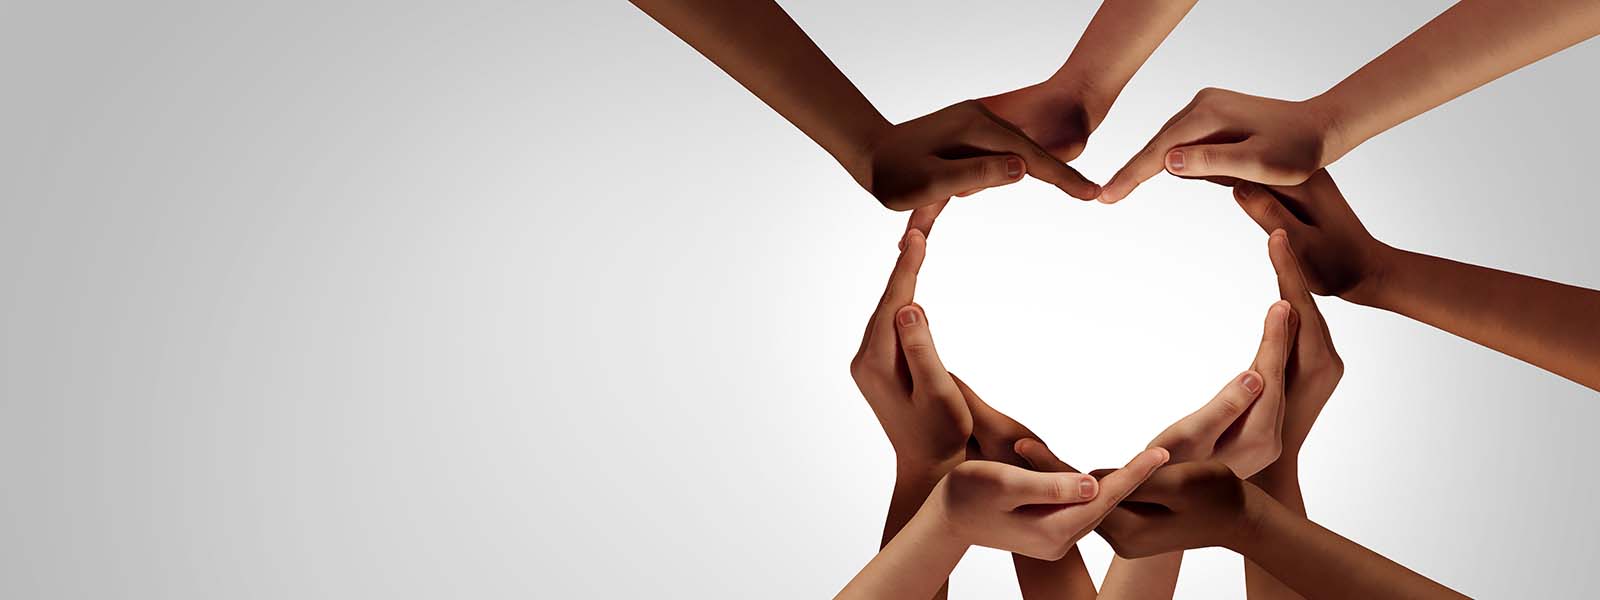 Unity and diversity partnership as heart hands in a group of diverse people